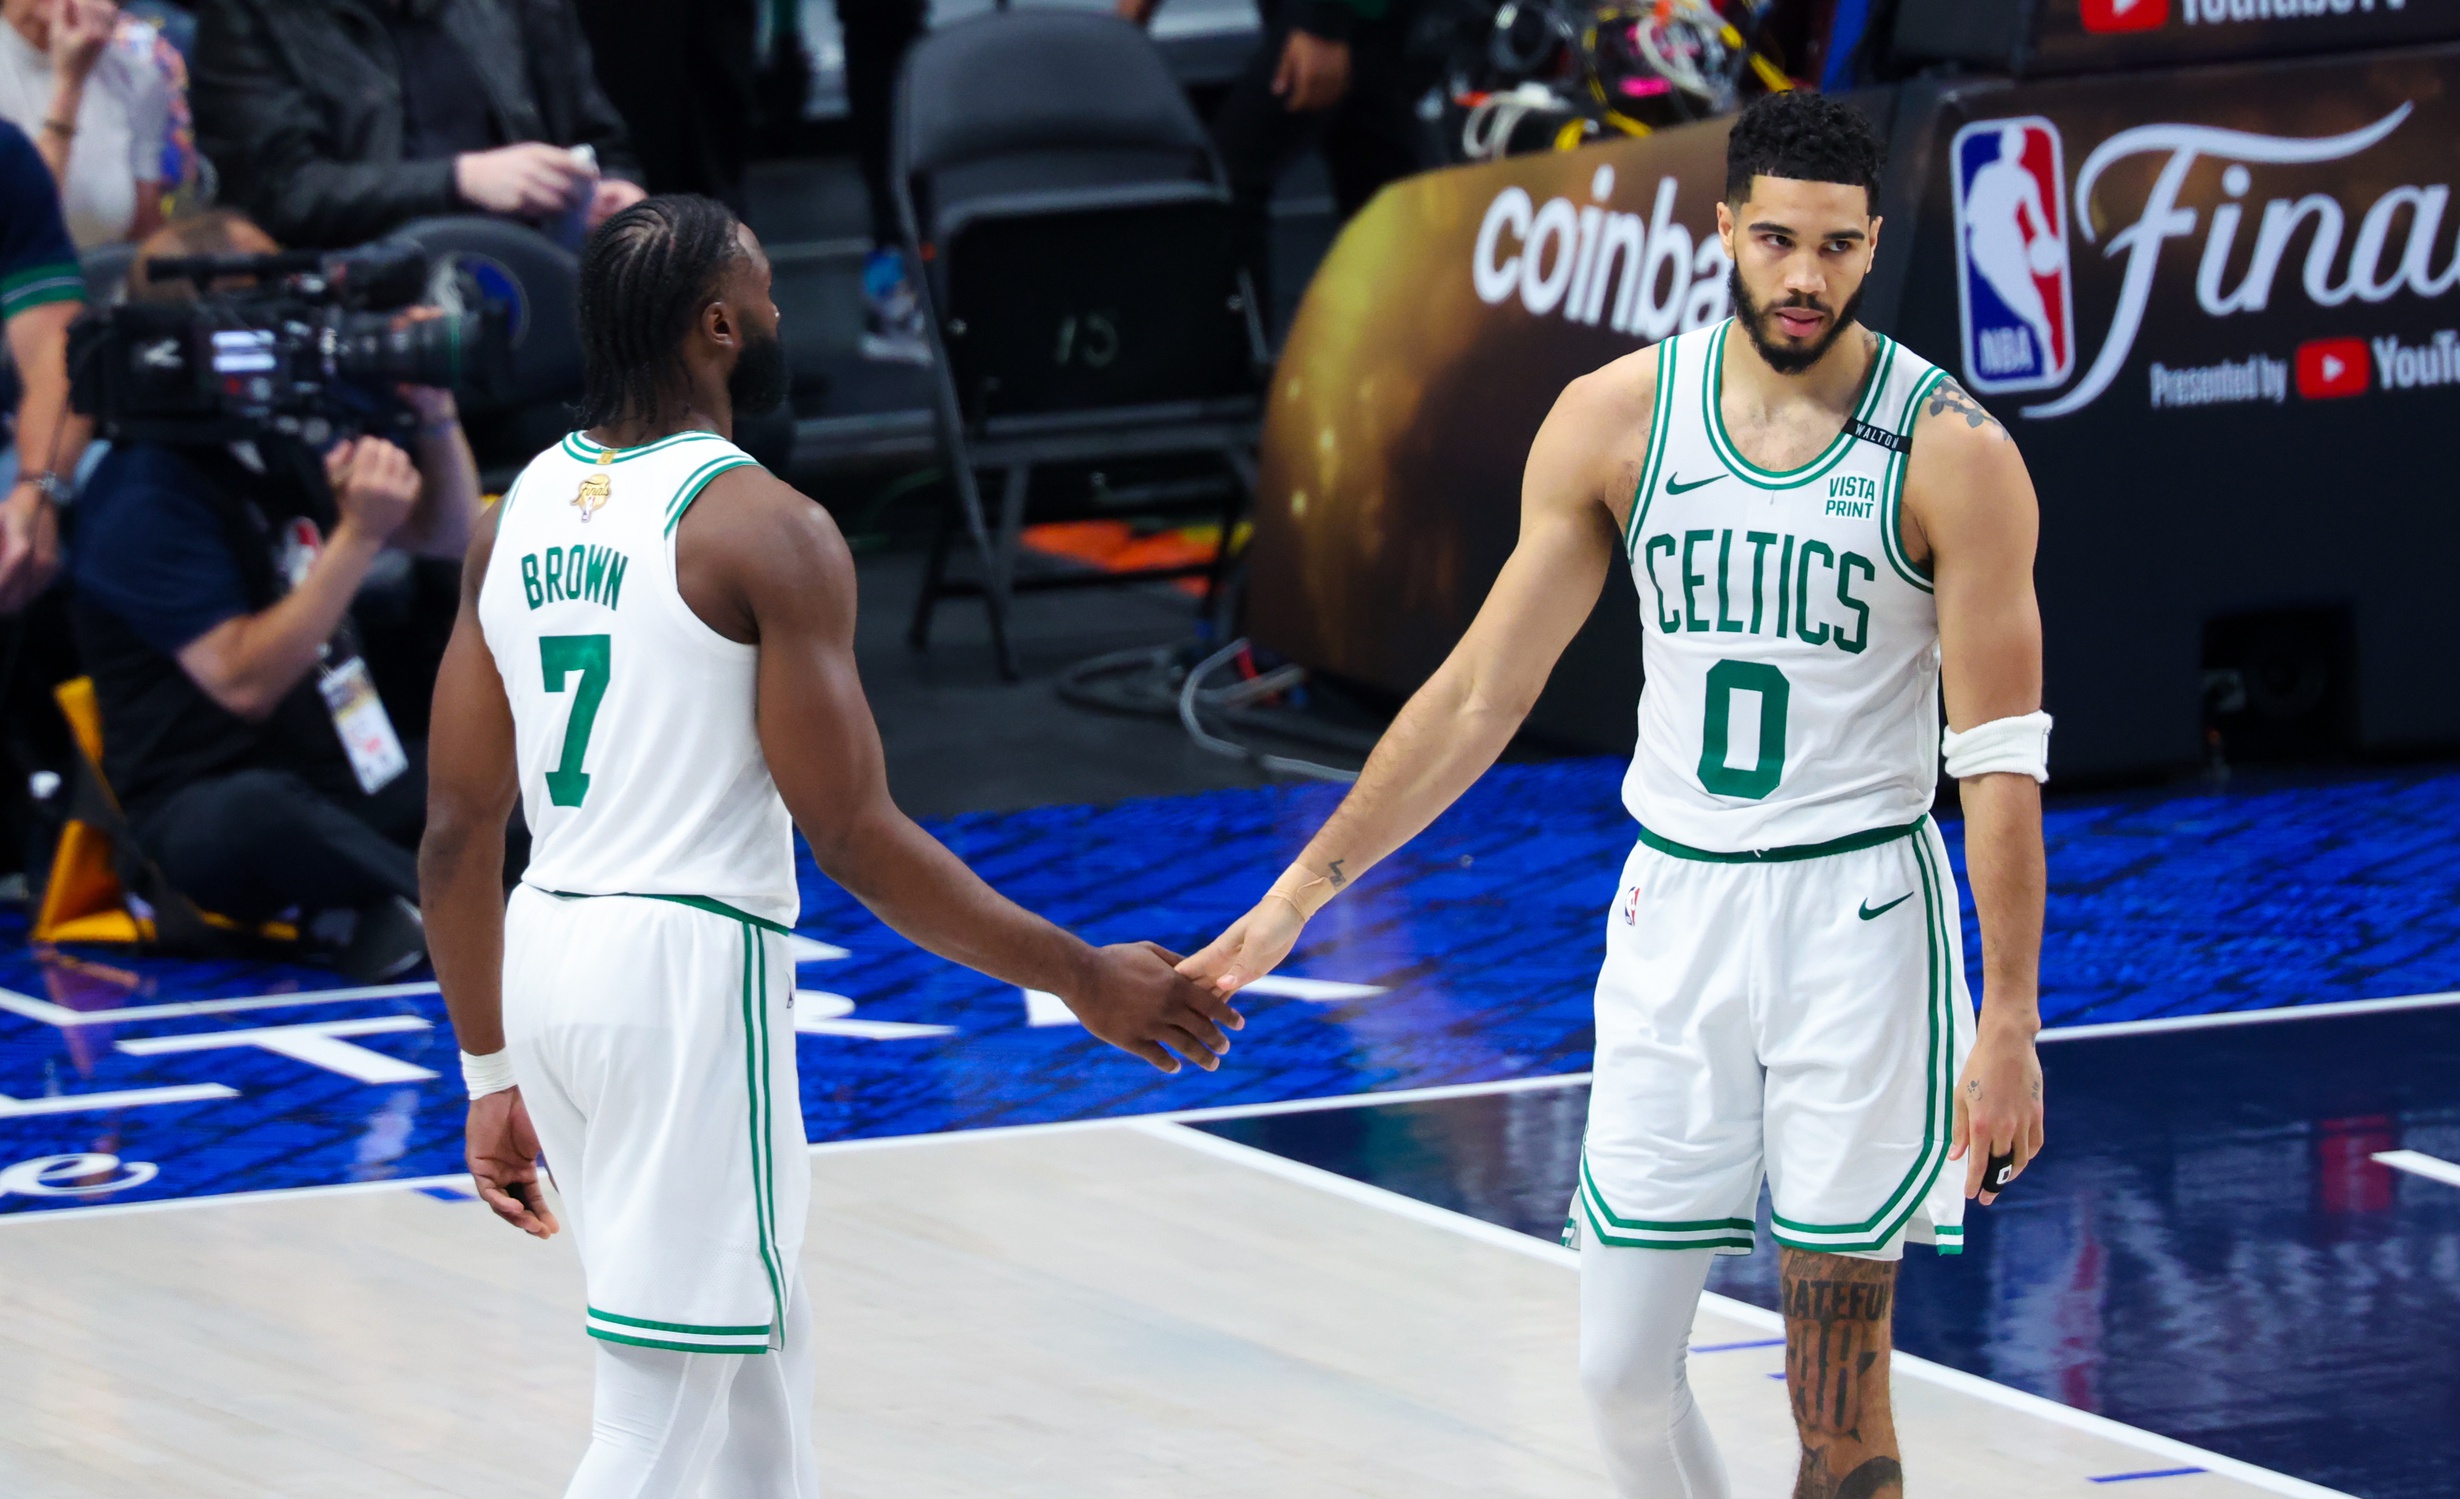 The Celtics are looking to clinch the NBA Finals.